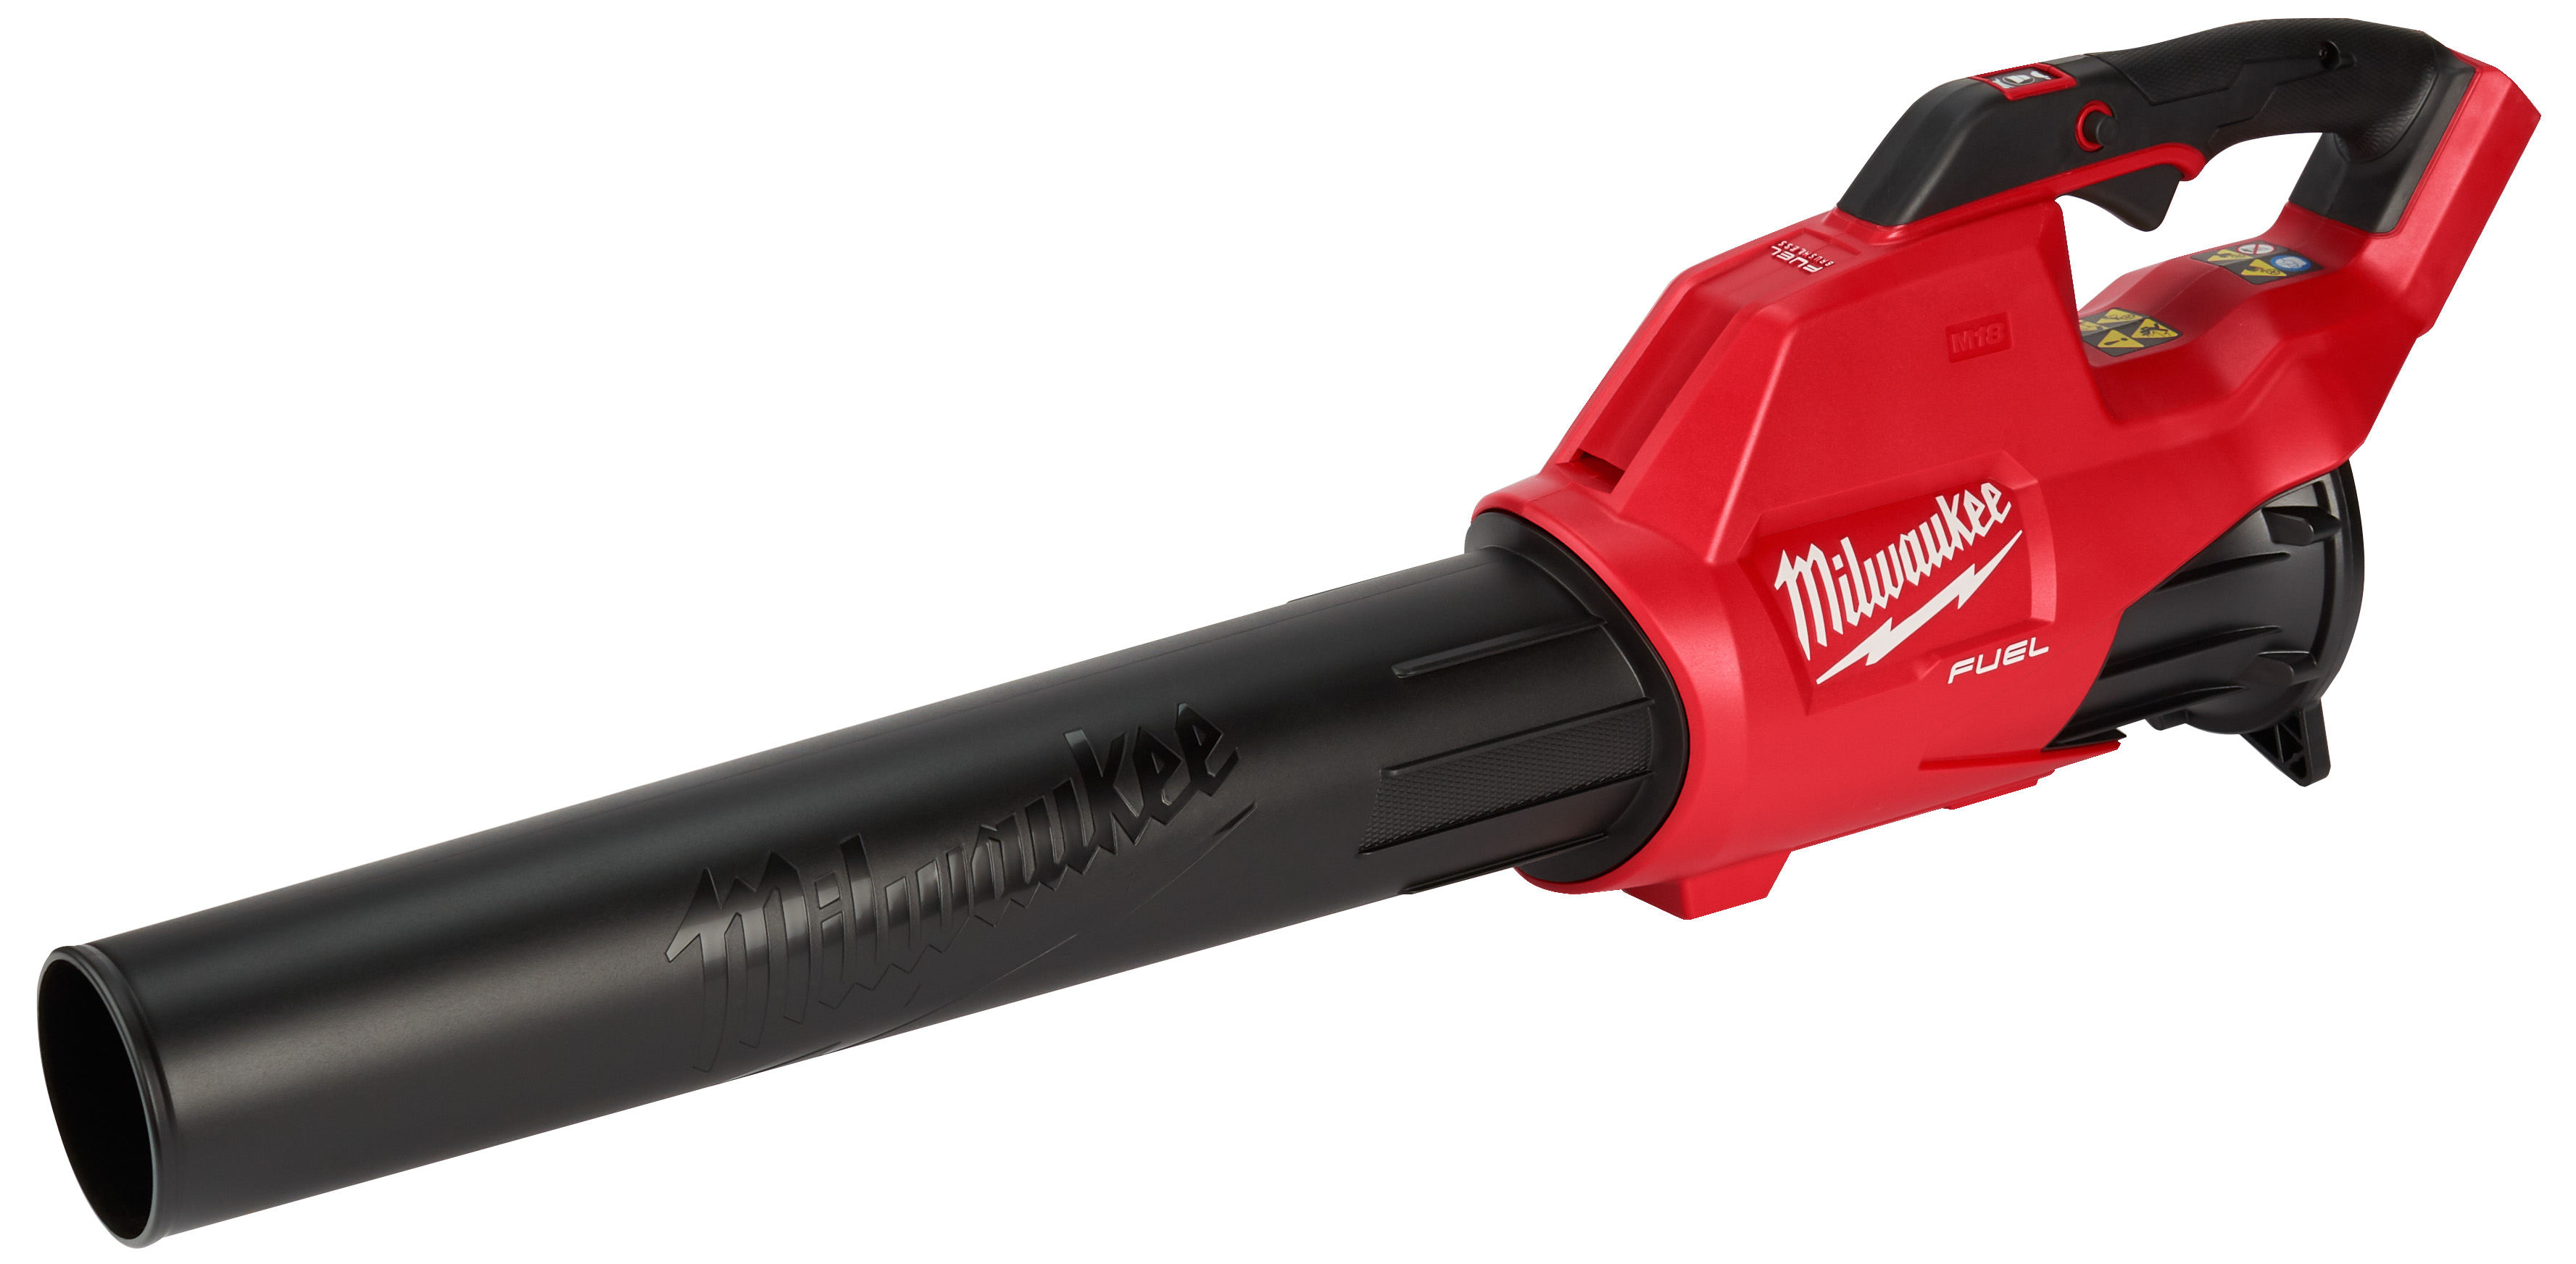 The M18 FUEL™ blower has the power to clear from 15 ft, gets to full throttle in under 1 second, and is up to 4 lbs lighter than competitors. Designed to meet landscape maintenance professional needs, the POWERSTATE™ brushless motor and REDLITHIUM™ HIGH DEMAND™ 9.0 battery (sold separately) deliver 450 CFM and 120 mph output. The blower features a variable speed trigger and high/low speed settings for increased control. The high setting is for the most demanding applications and low is optimized for clearing debris from flower beds without moving mulch. The lock on button allows the blower to be locked on to full throttle, so the operating hand can be relaxed reducing fatigue. The M18 FUEL™ blower is fully compatible with 150+ solutions on the M18™ system.